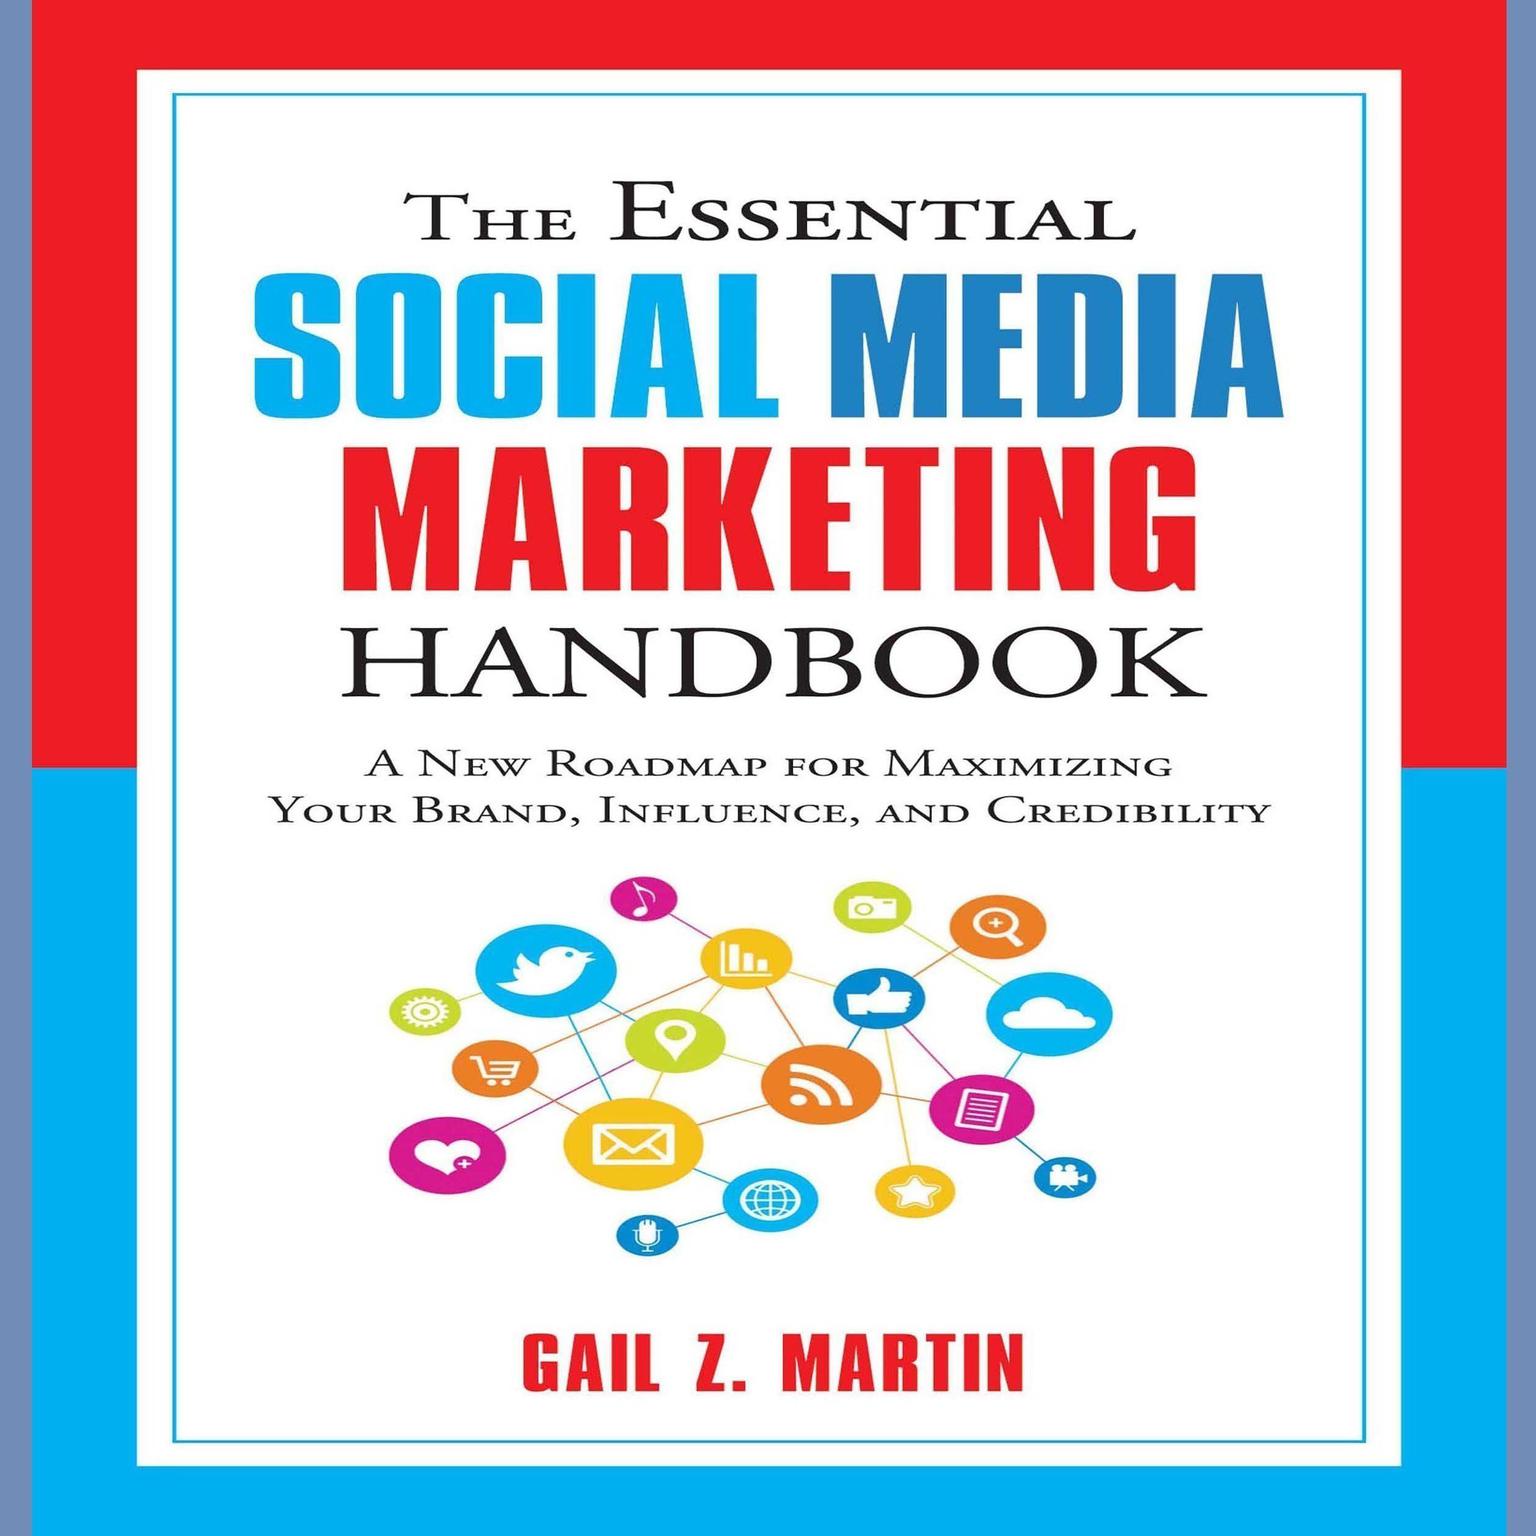 The Essential Social Media Marketing Handbook: A New Roadmap for Maximizing Your Brand, Influence, and Credibility Audiobook, by Gail Z. Martin